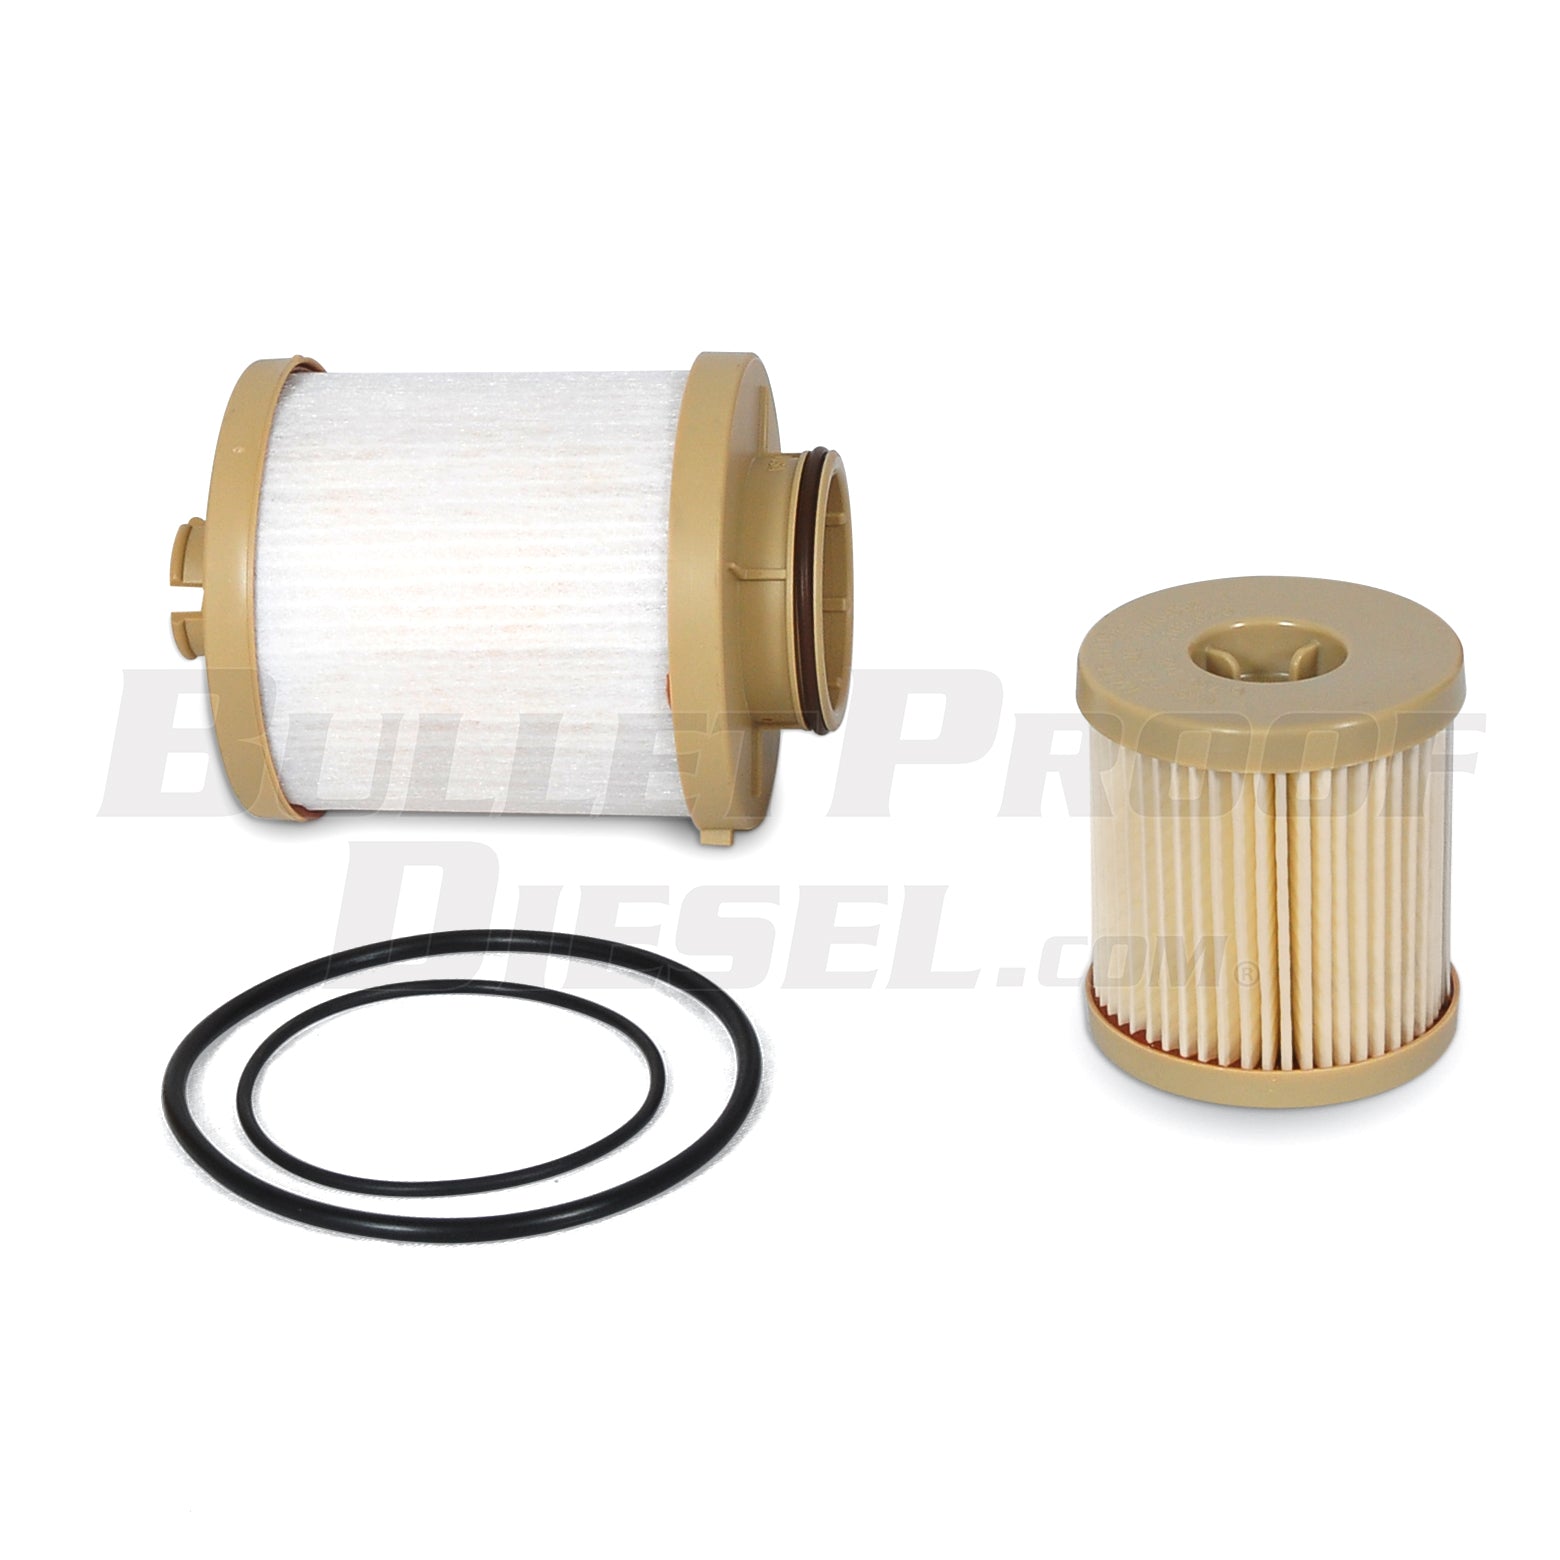 2003-2004 6.0L F-Series, Professional Package - OEM Oil Filter